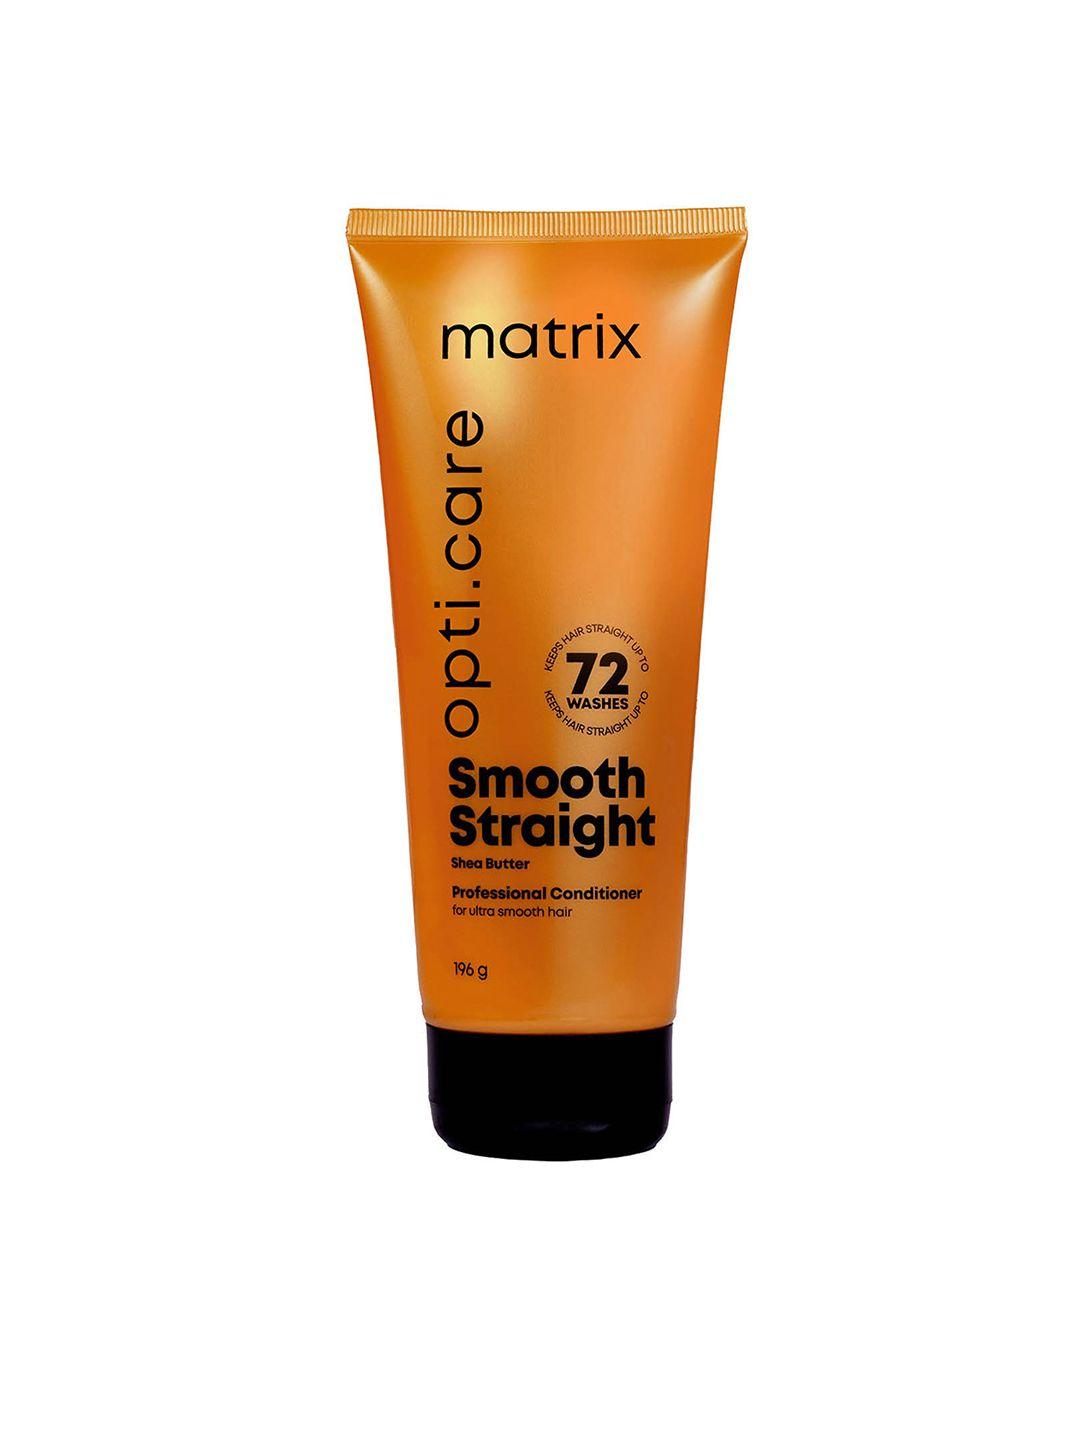 matrix-opti-care-smooth-straight-professional-conditioner-with-shea-butter---196-g